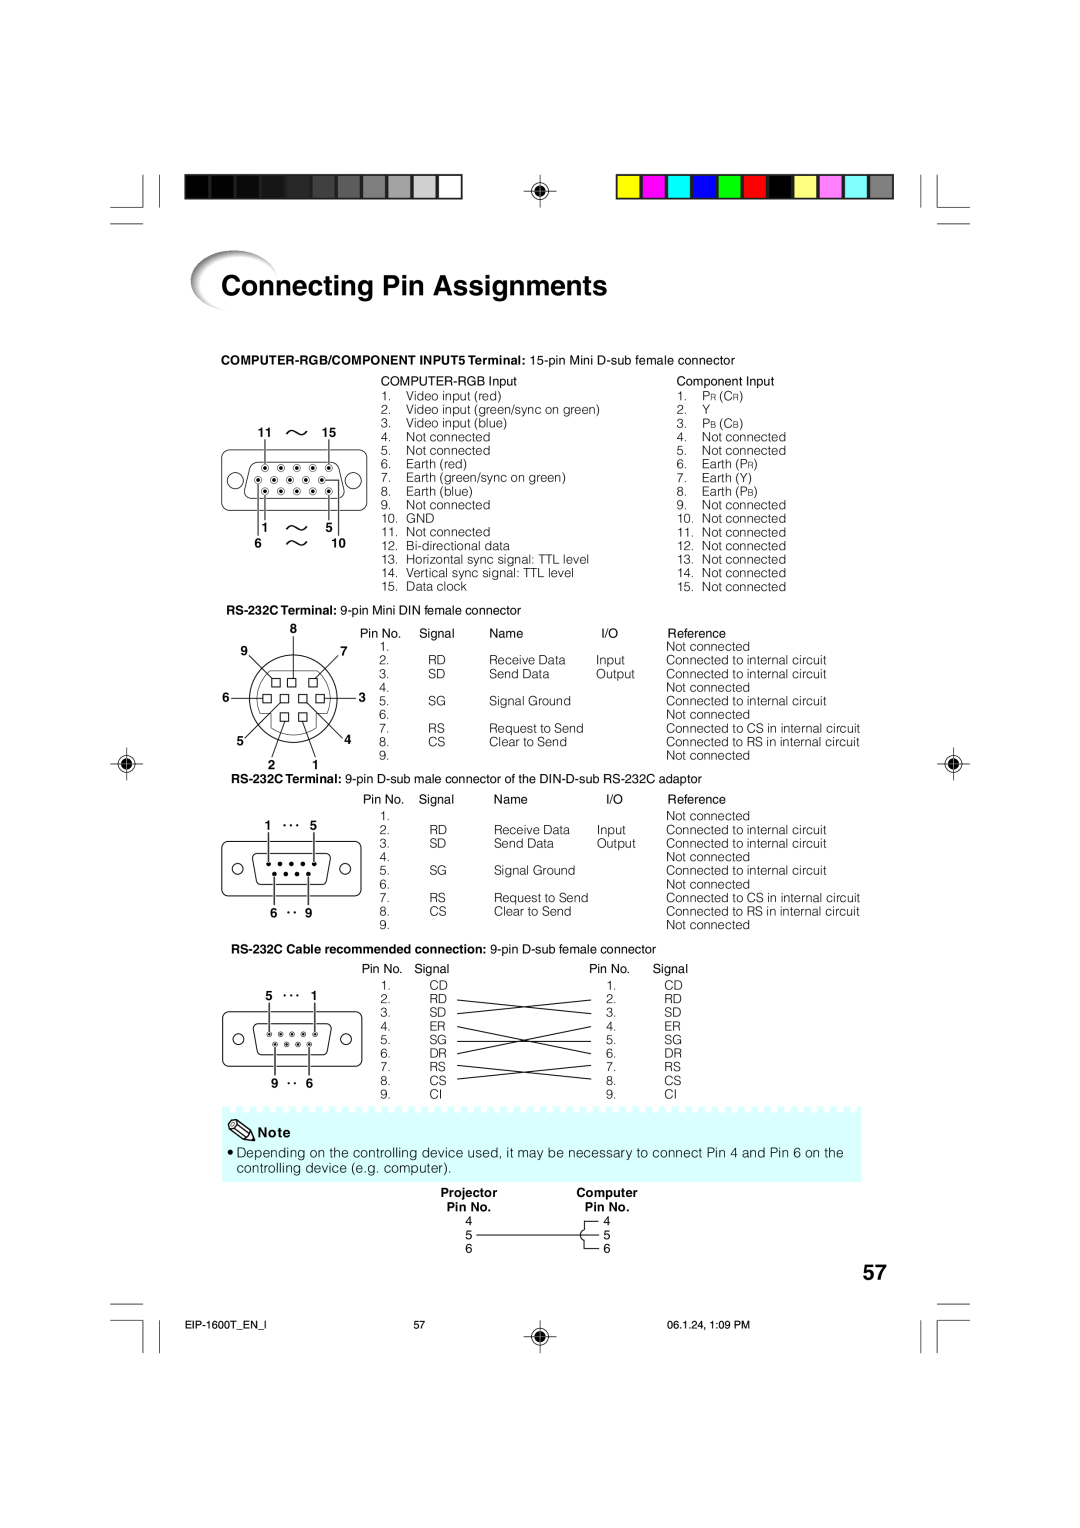 Eiki EIP-1600T owner manual Connecting Pin Assignments, Projector, Computer 